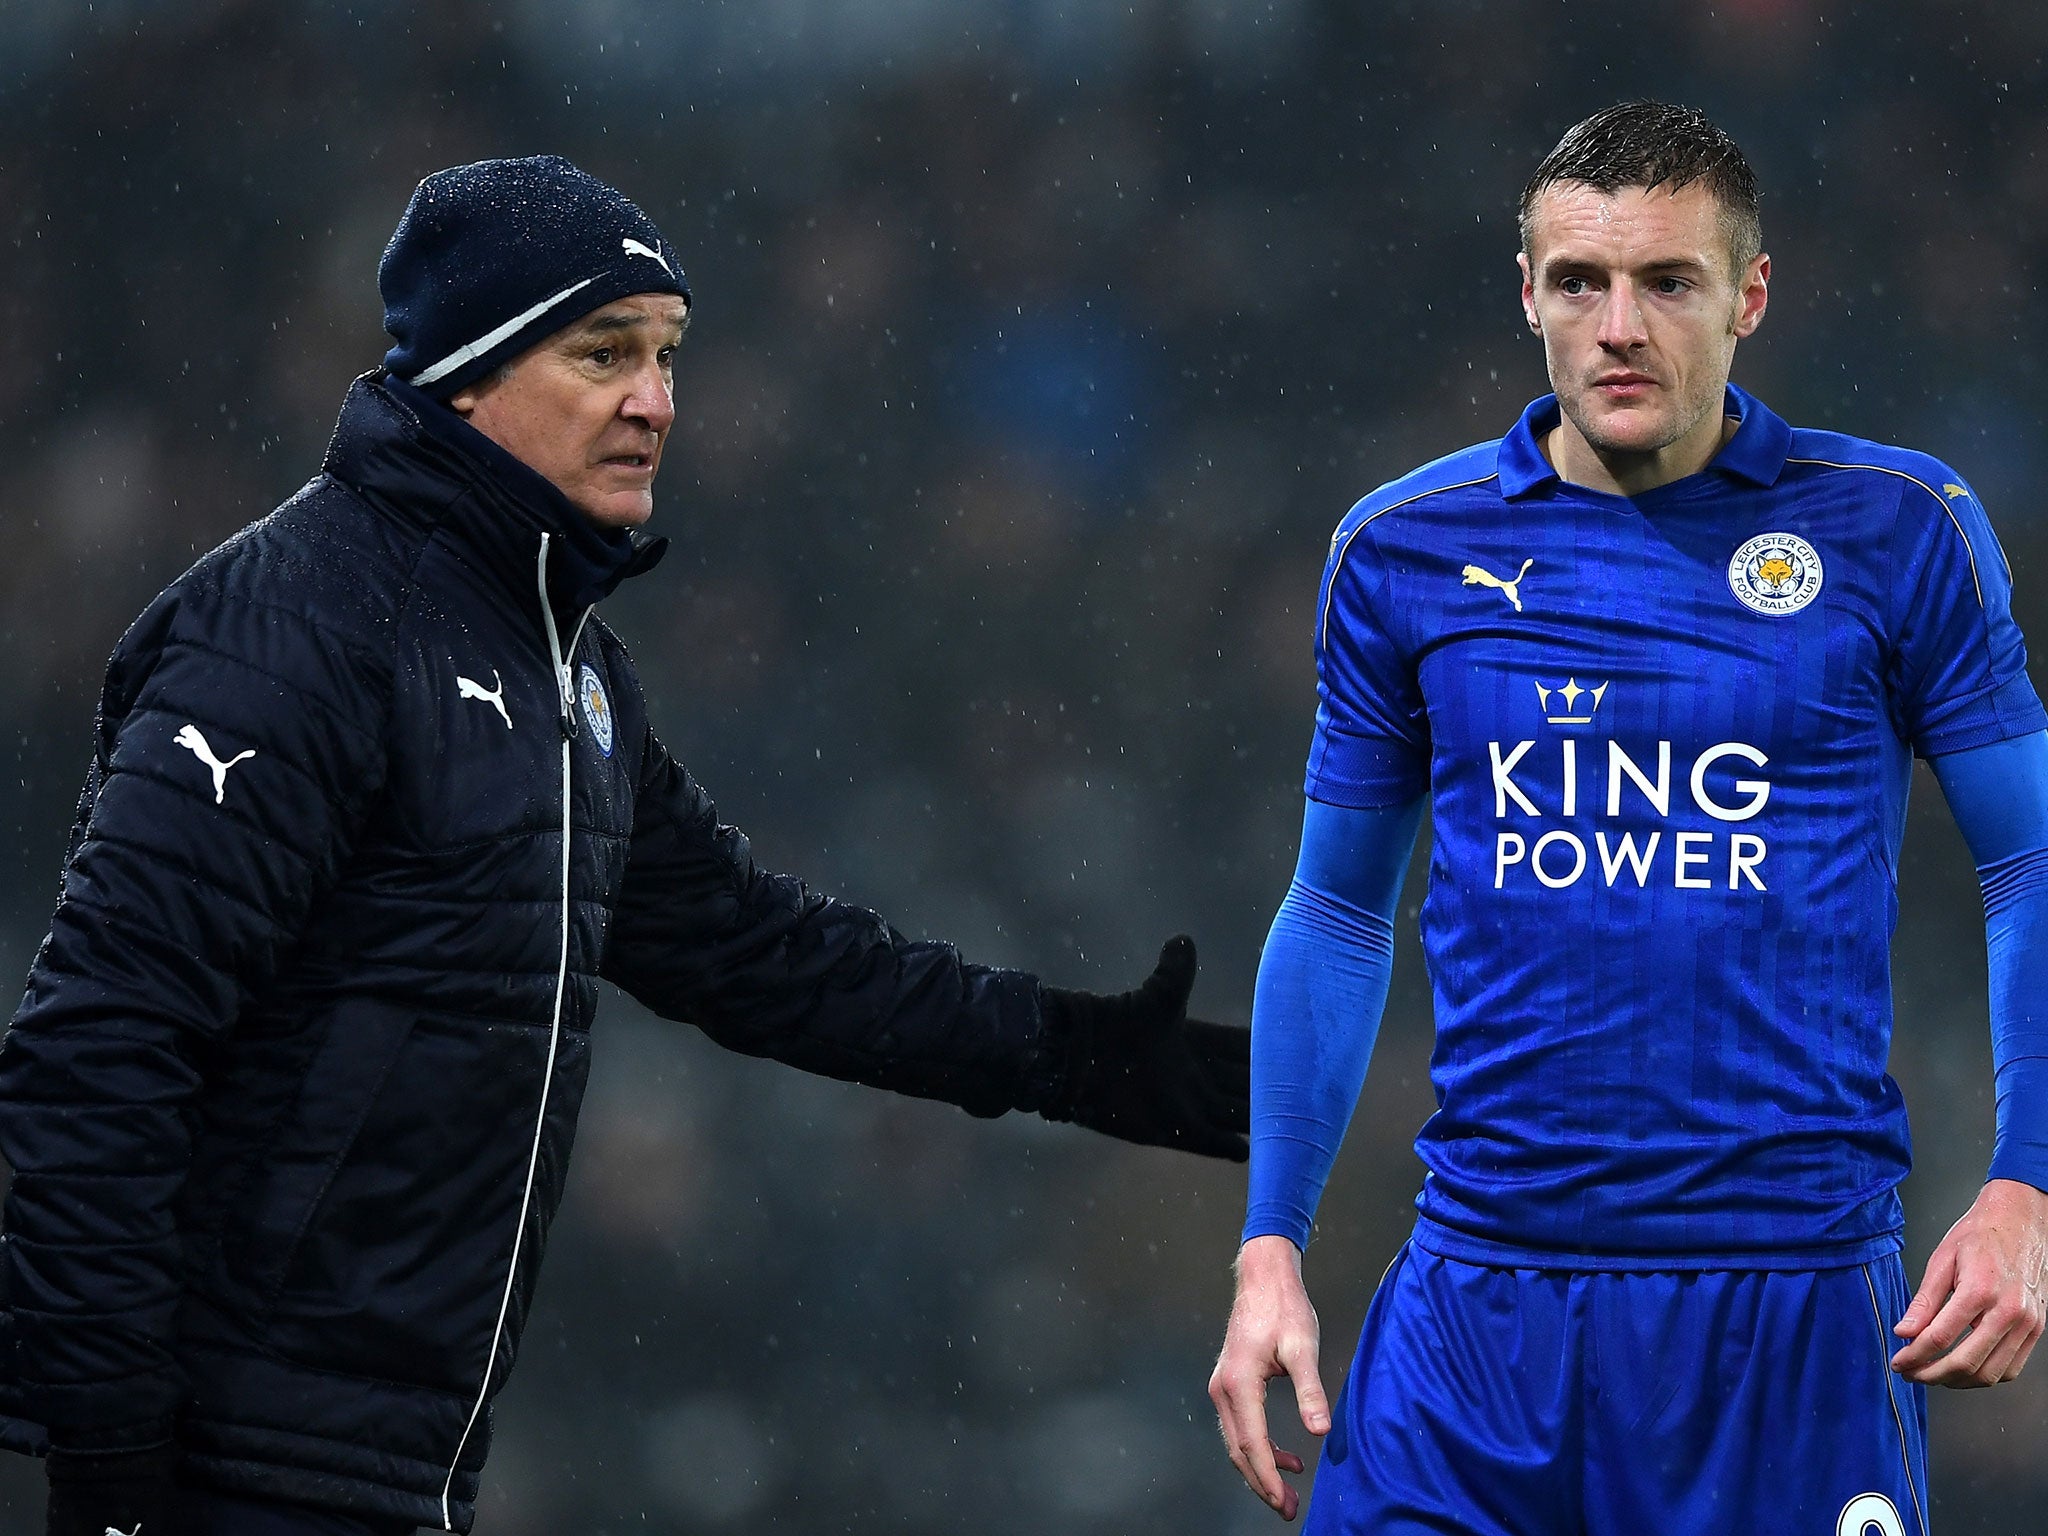 Reports have emerged suggesting Vardy and Co approached the club's owners with complaints over Ranieri